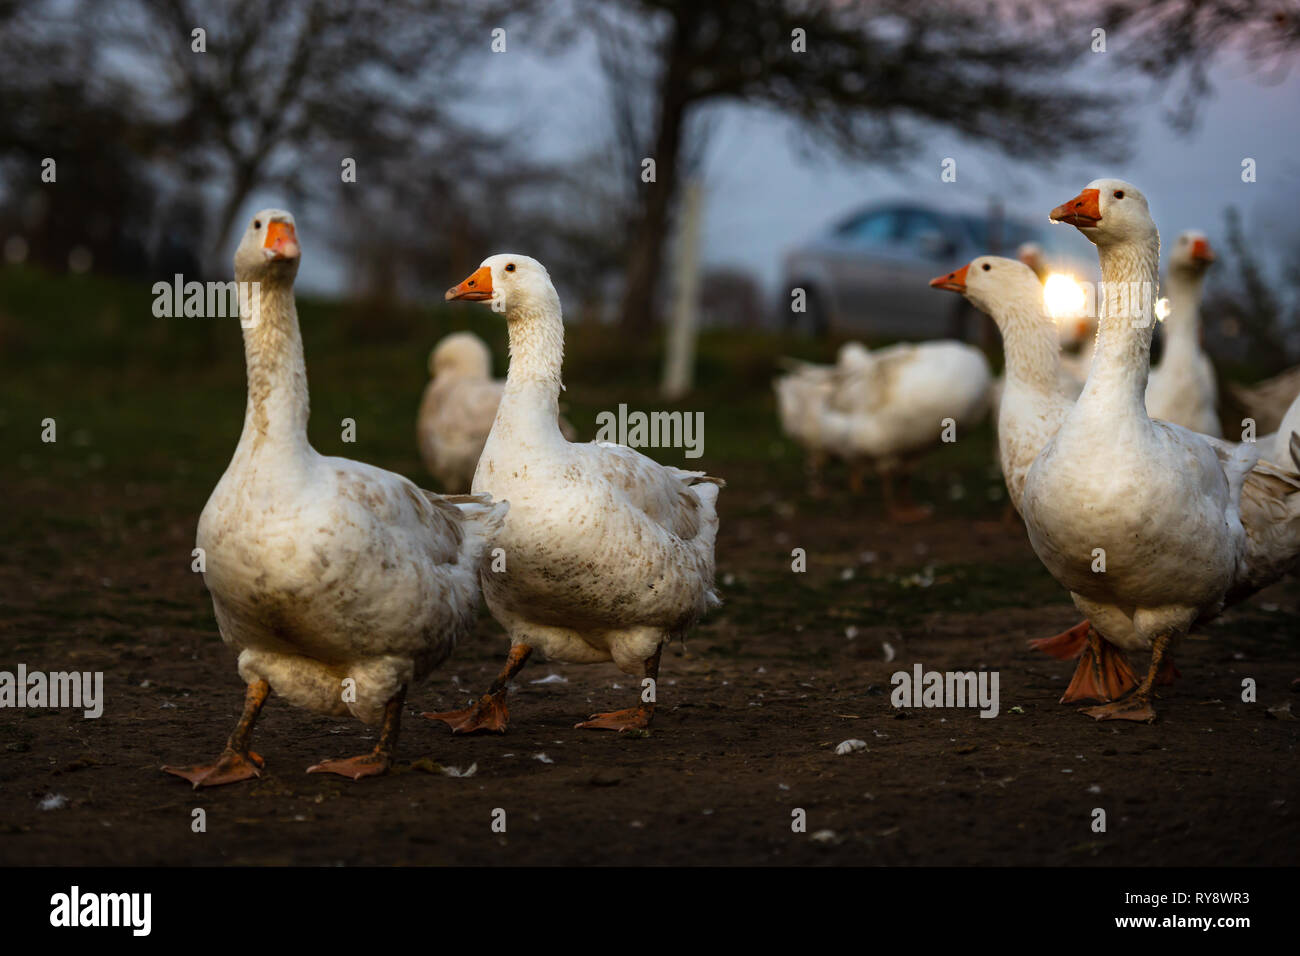 White fattened geese at dusk next to a busy road Stock Photo